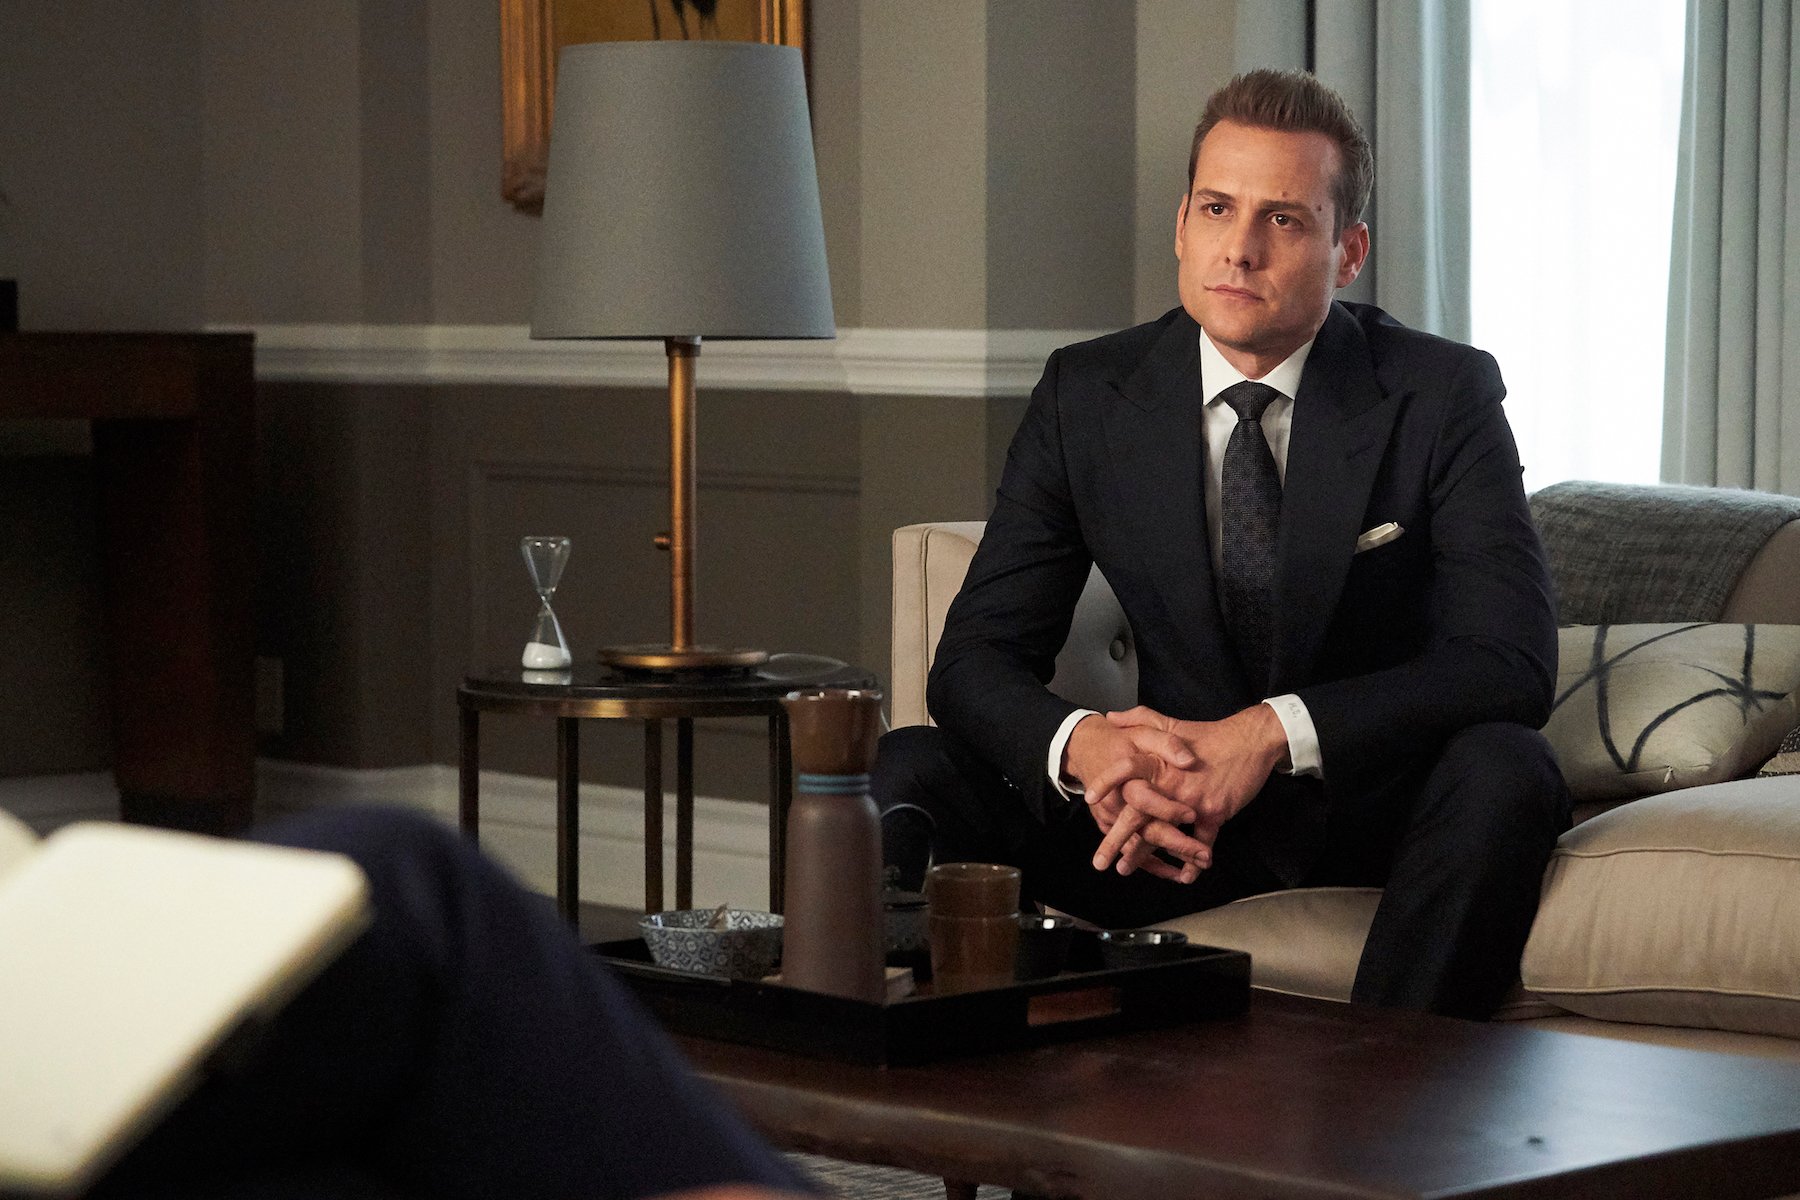 Gabriel Macht as Harvey Spencer on 'Suits' sitting with his hands folded